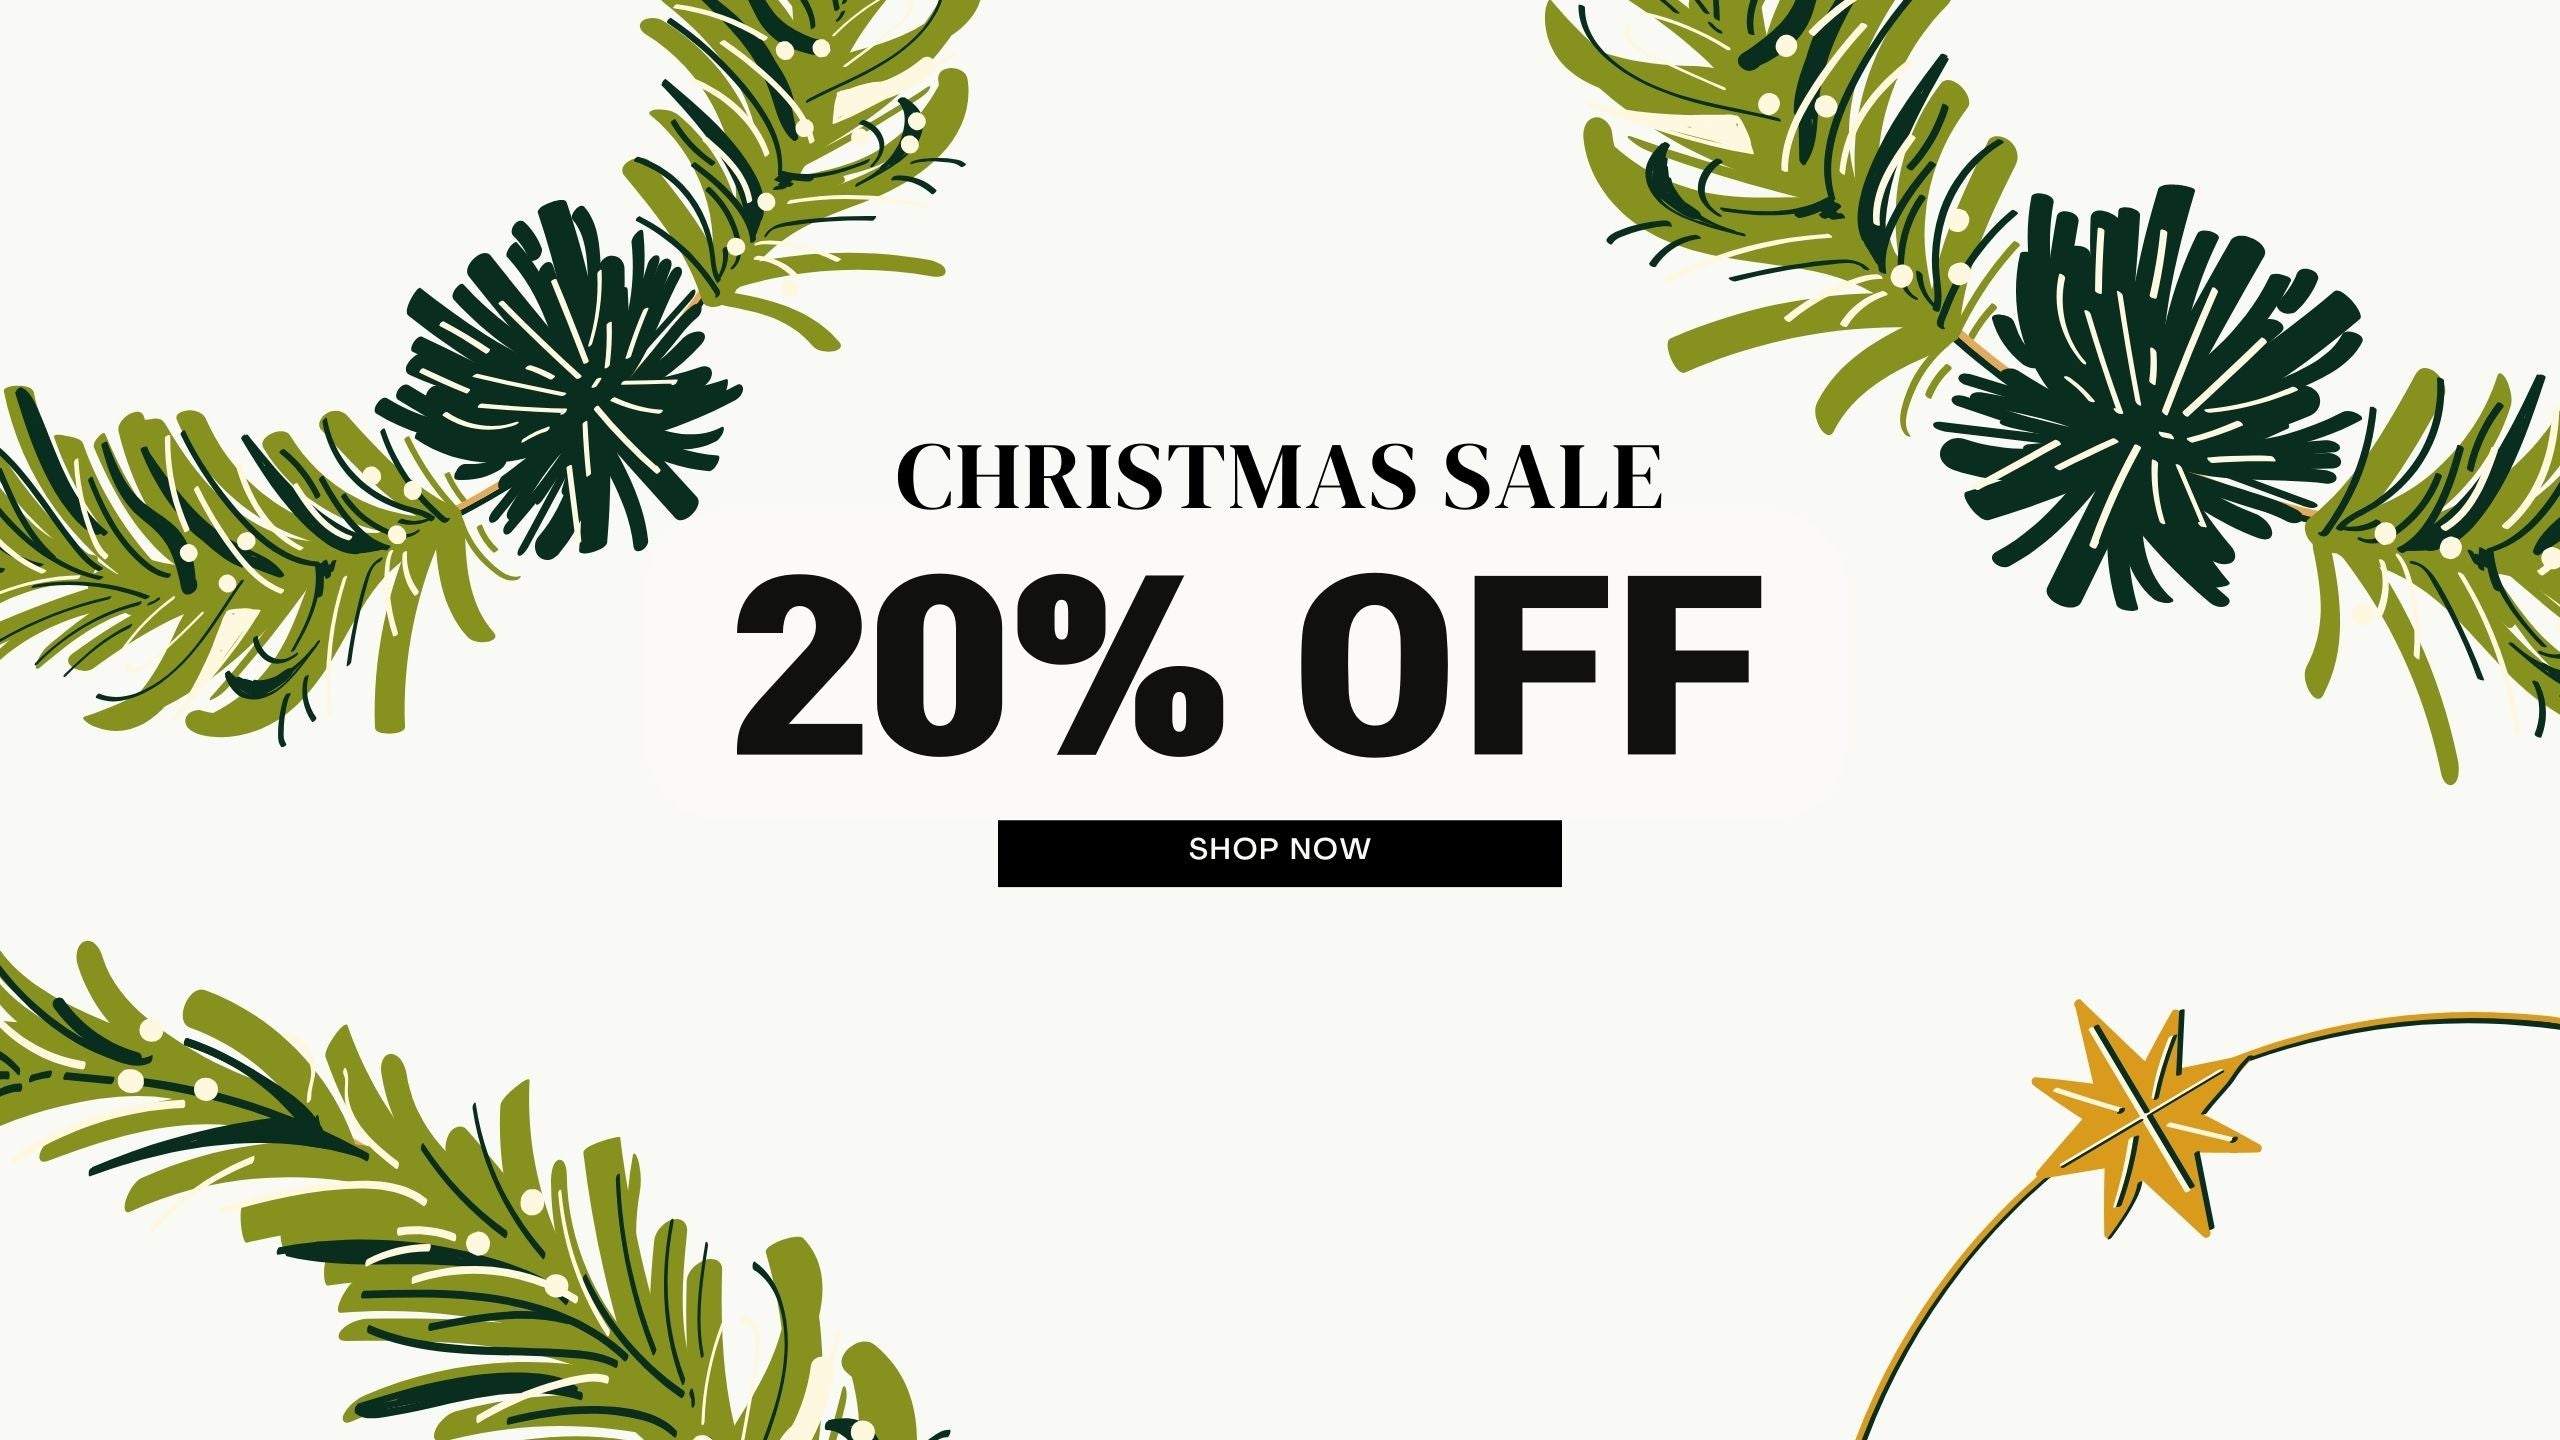 Christmas Sale Starts NOW! ﹣20% OFF